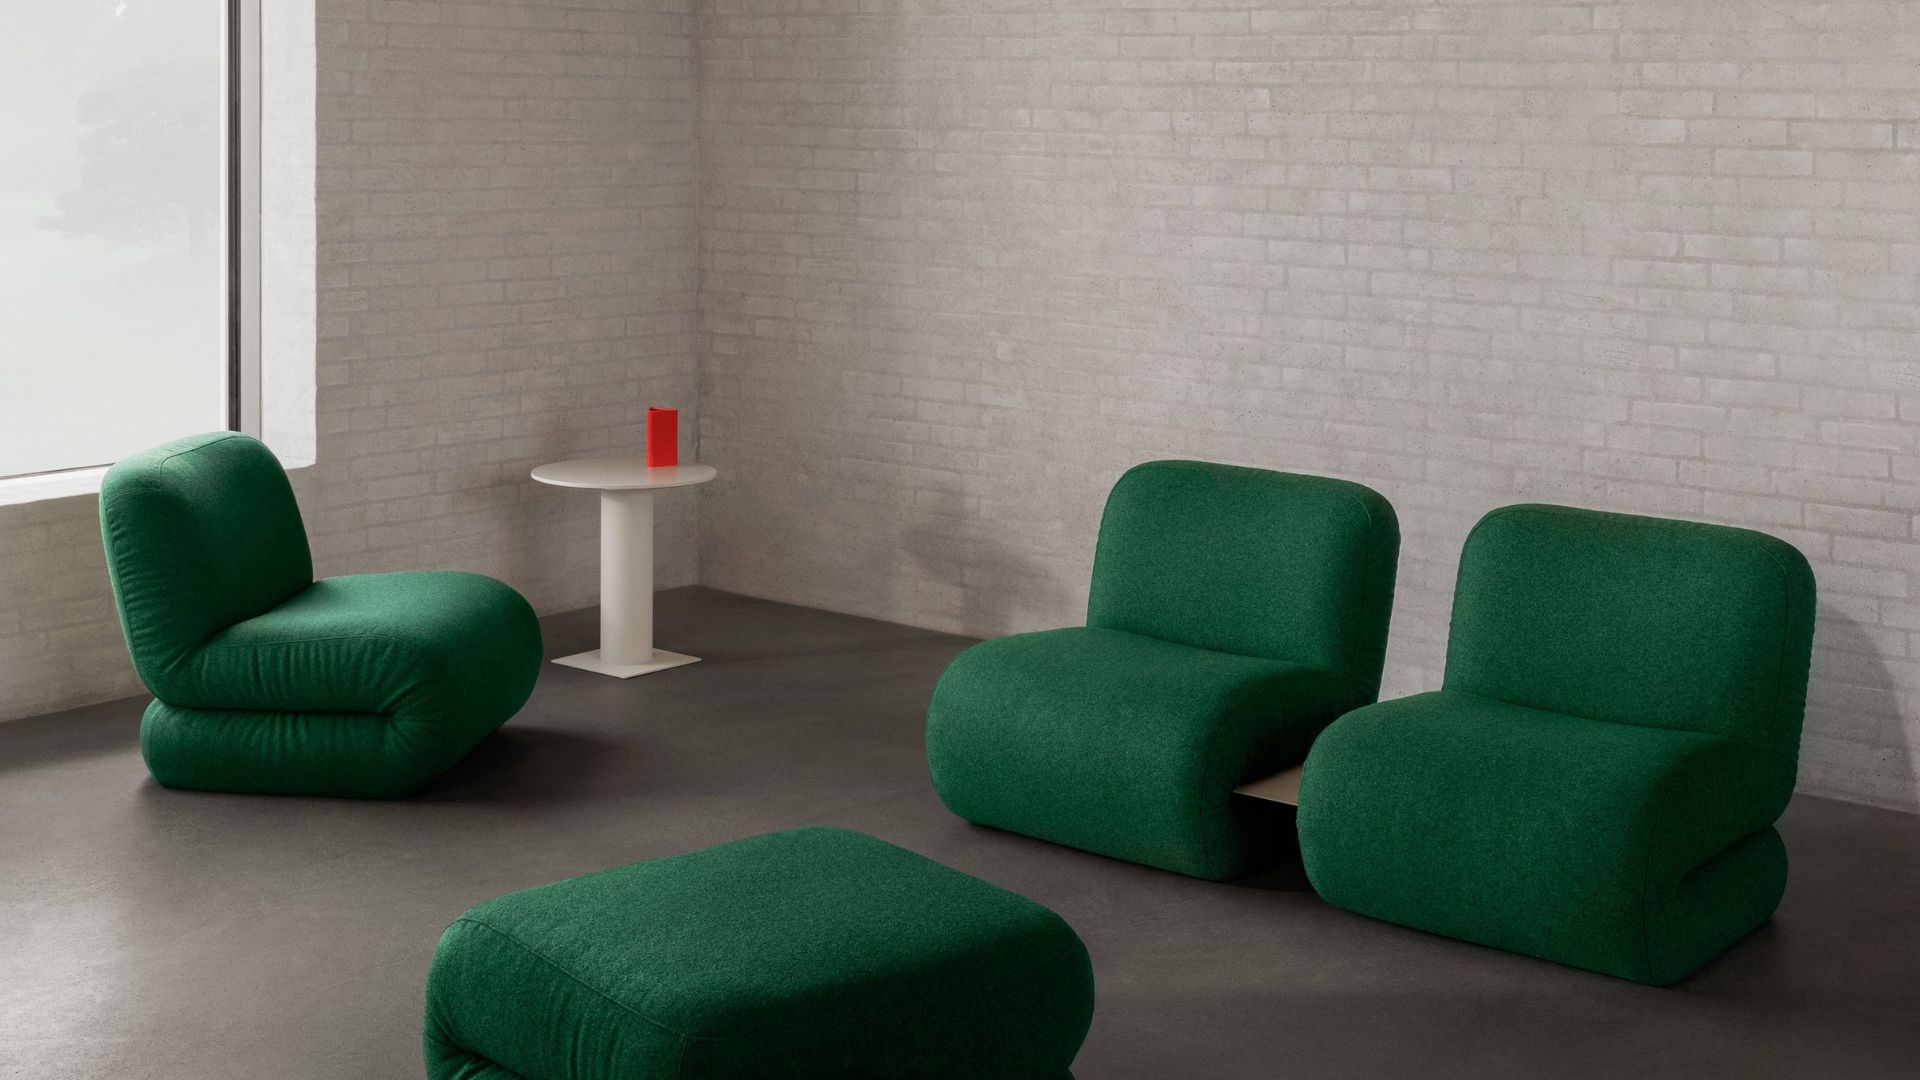 Bau modular seating by Note design studio for Lammhults